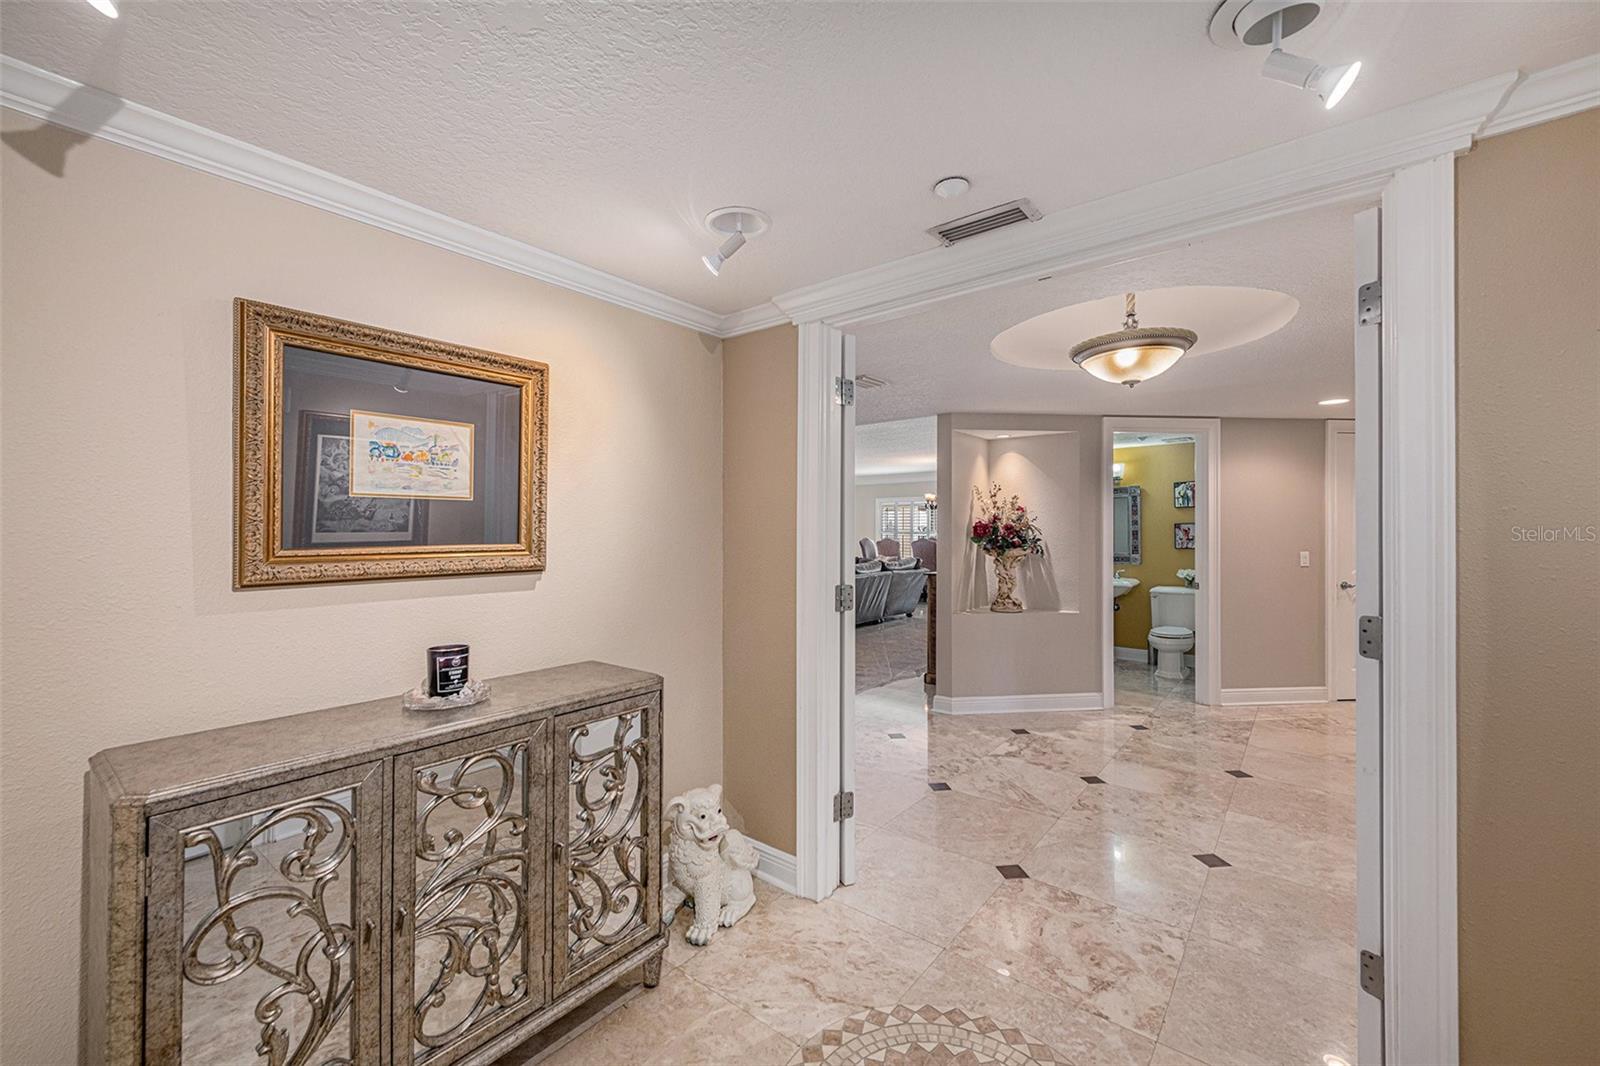 Elegant and Extraordinary - A one of a kind condo with stunning details.